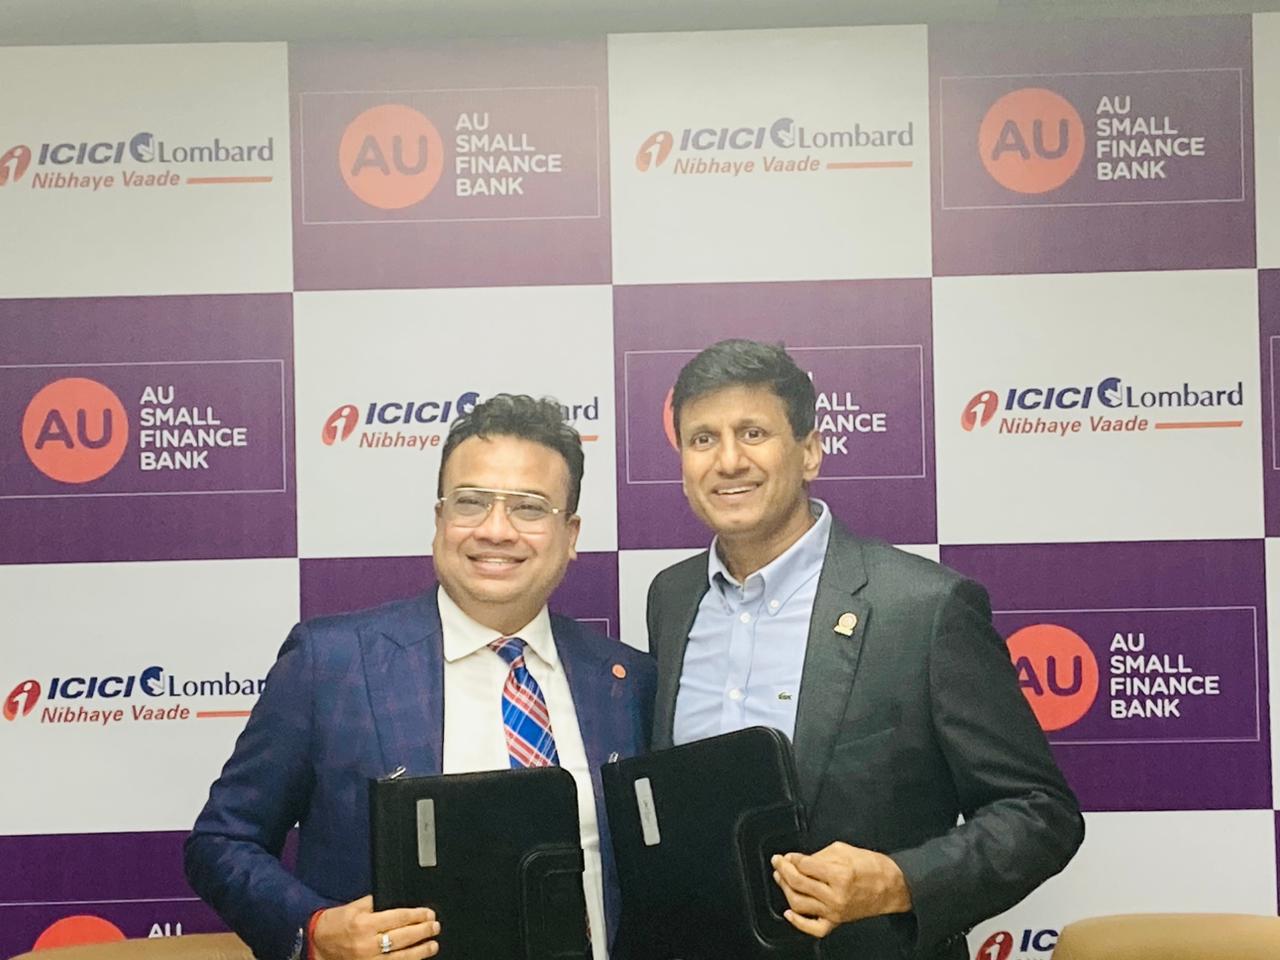 icici-lombard-and-au-small-finance-bank-announce-bancassurance-tie-up